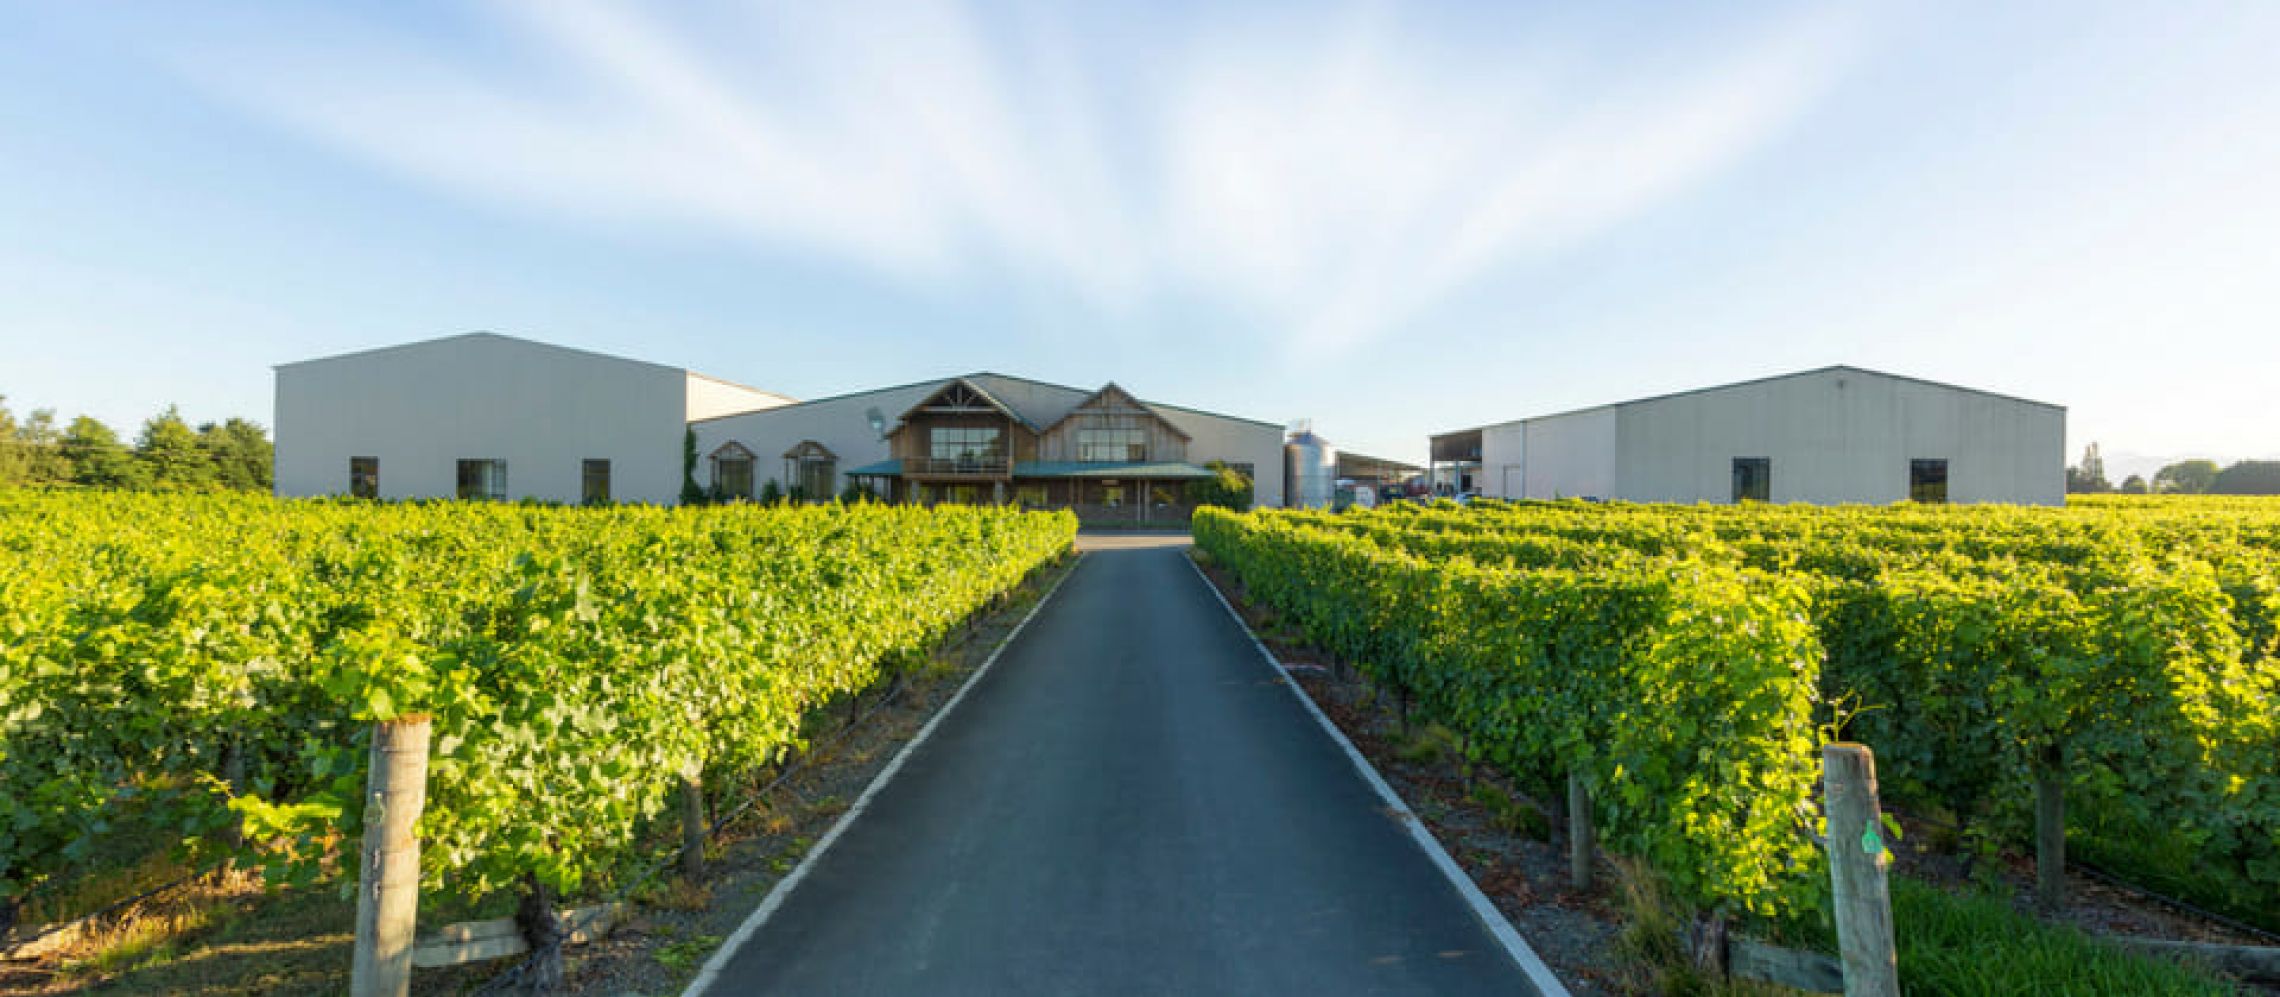 Photo for: Seifried Estate - Pioneering Family Wine Growers in New Zealand